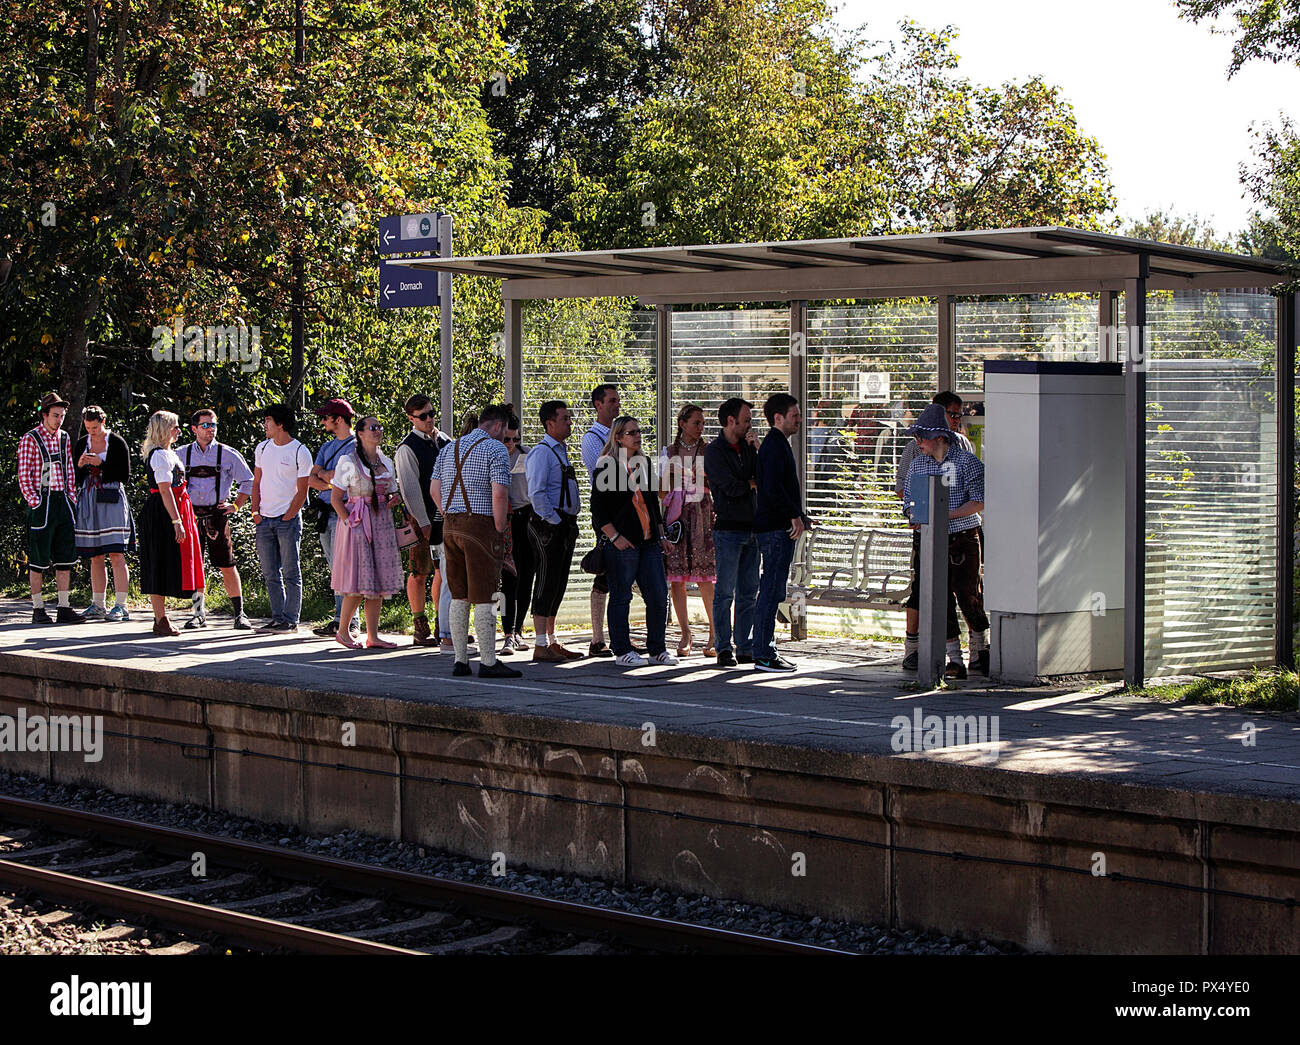 Oktoberfest party goers obtaining tickets at Riem Station on the U-Bahn on a glorious sunny day in late September. Stock Photo